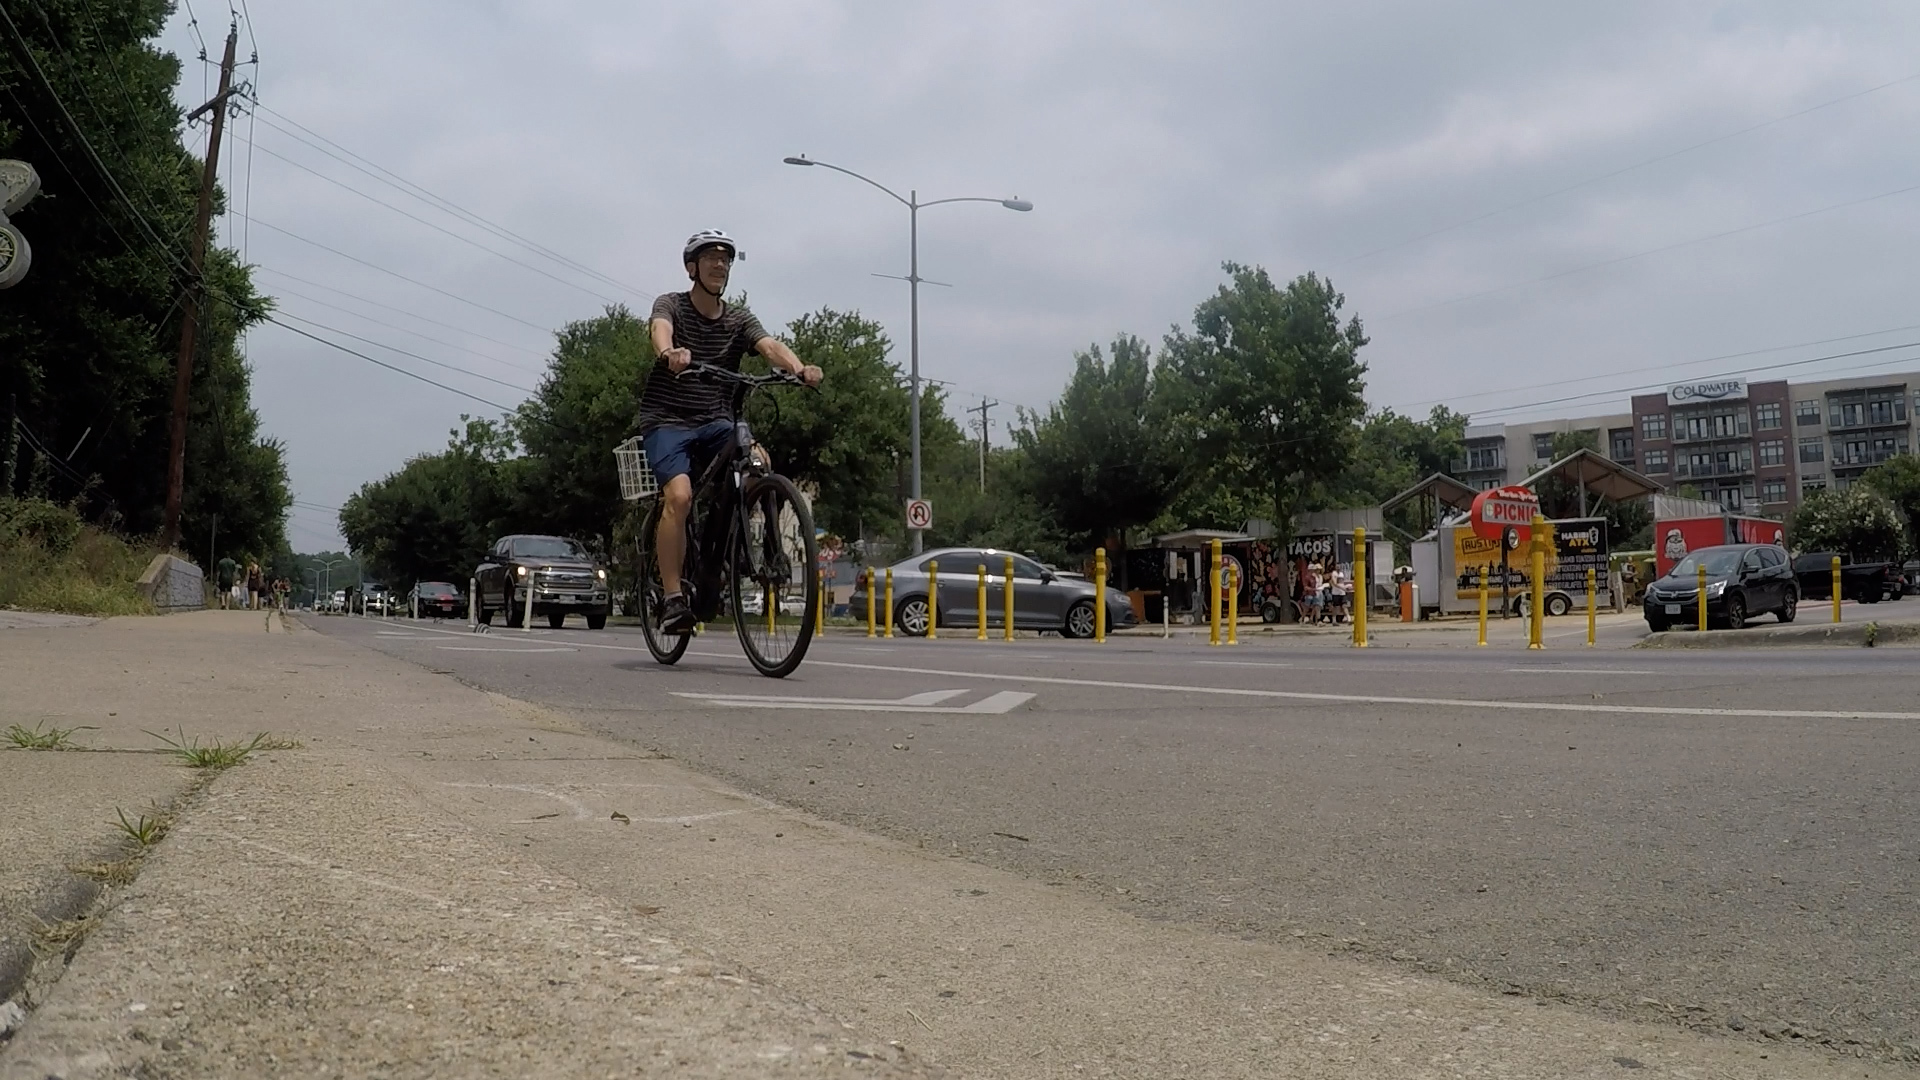 In a six-month study of the safety program, Austin Transportation and Public Works says the number of drivers speeding on Barton Springs Road has decreased by 64%.